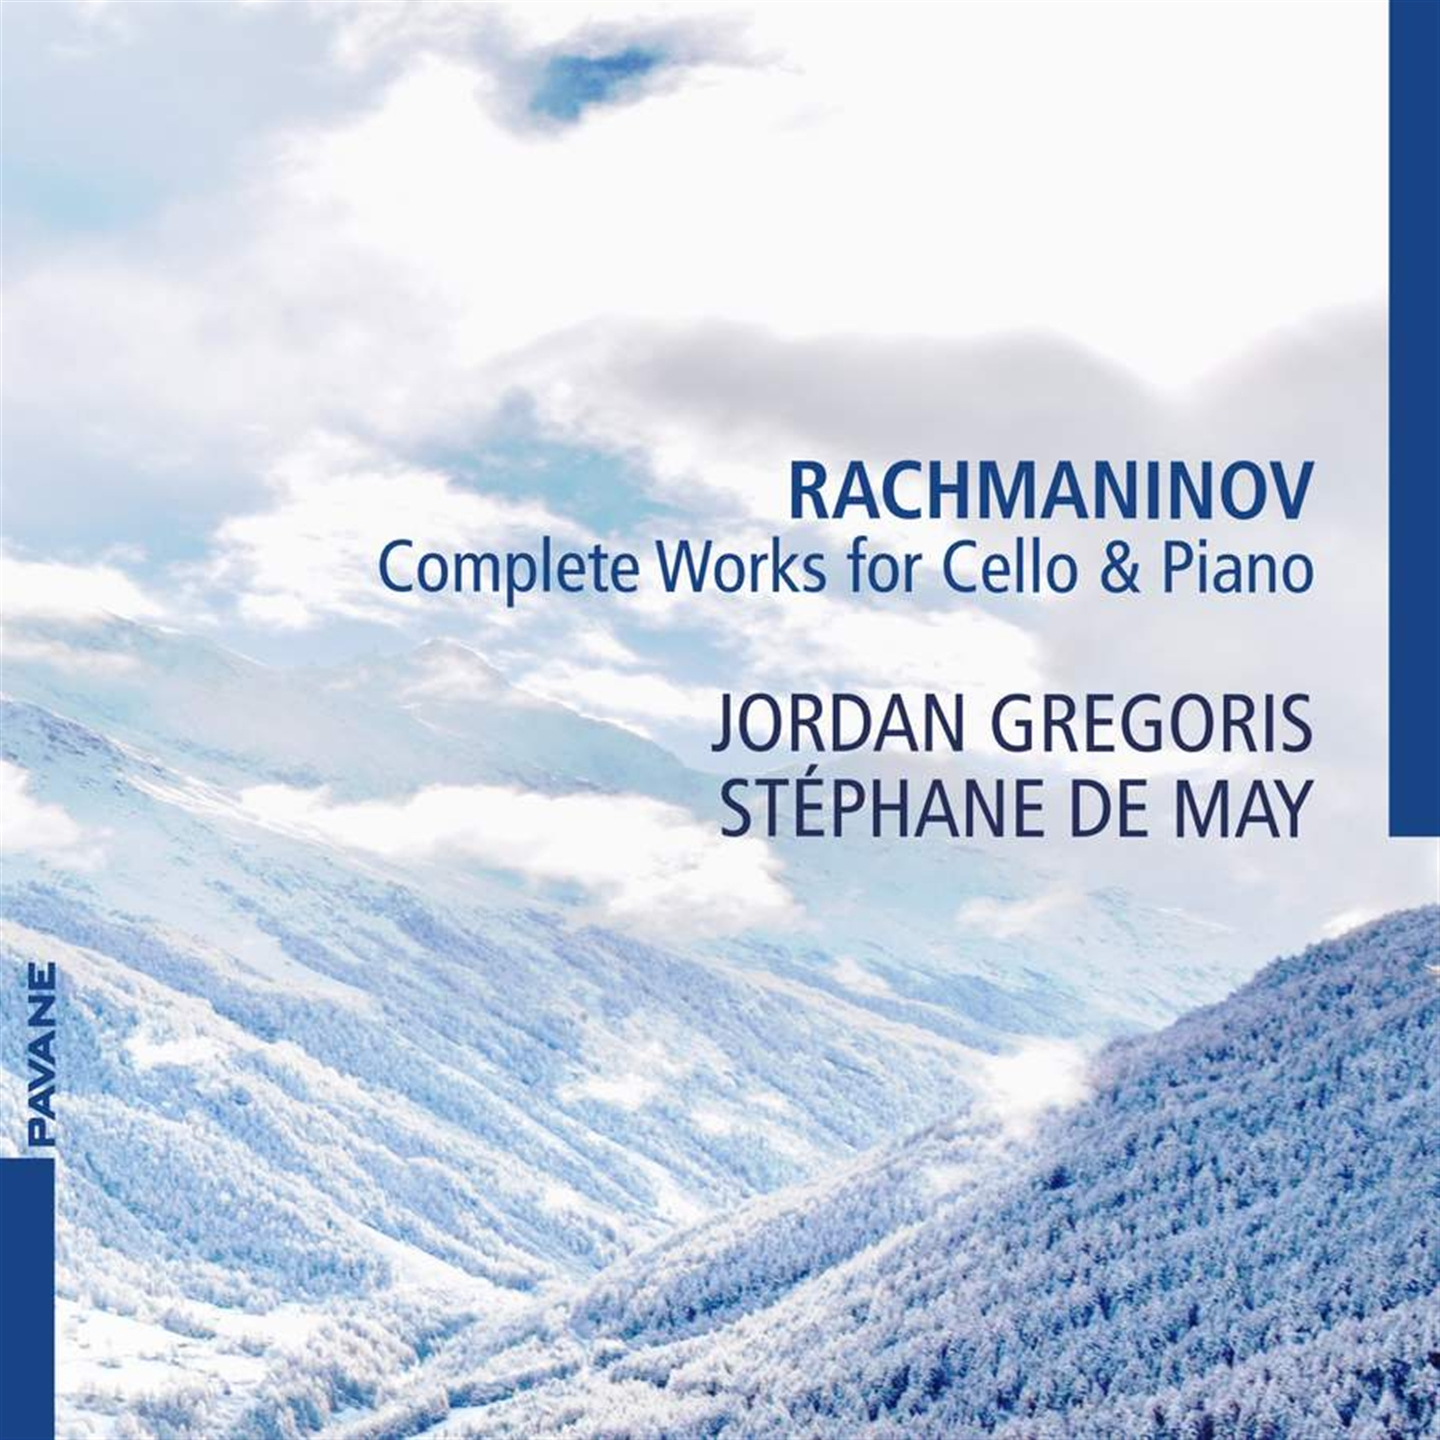 RACHMANINOV: COMPLETE WORKS FOR CELLO AND PIANO